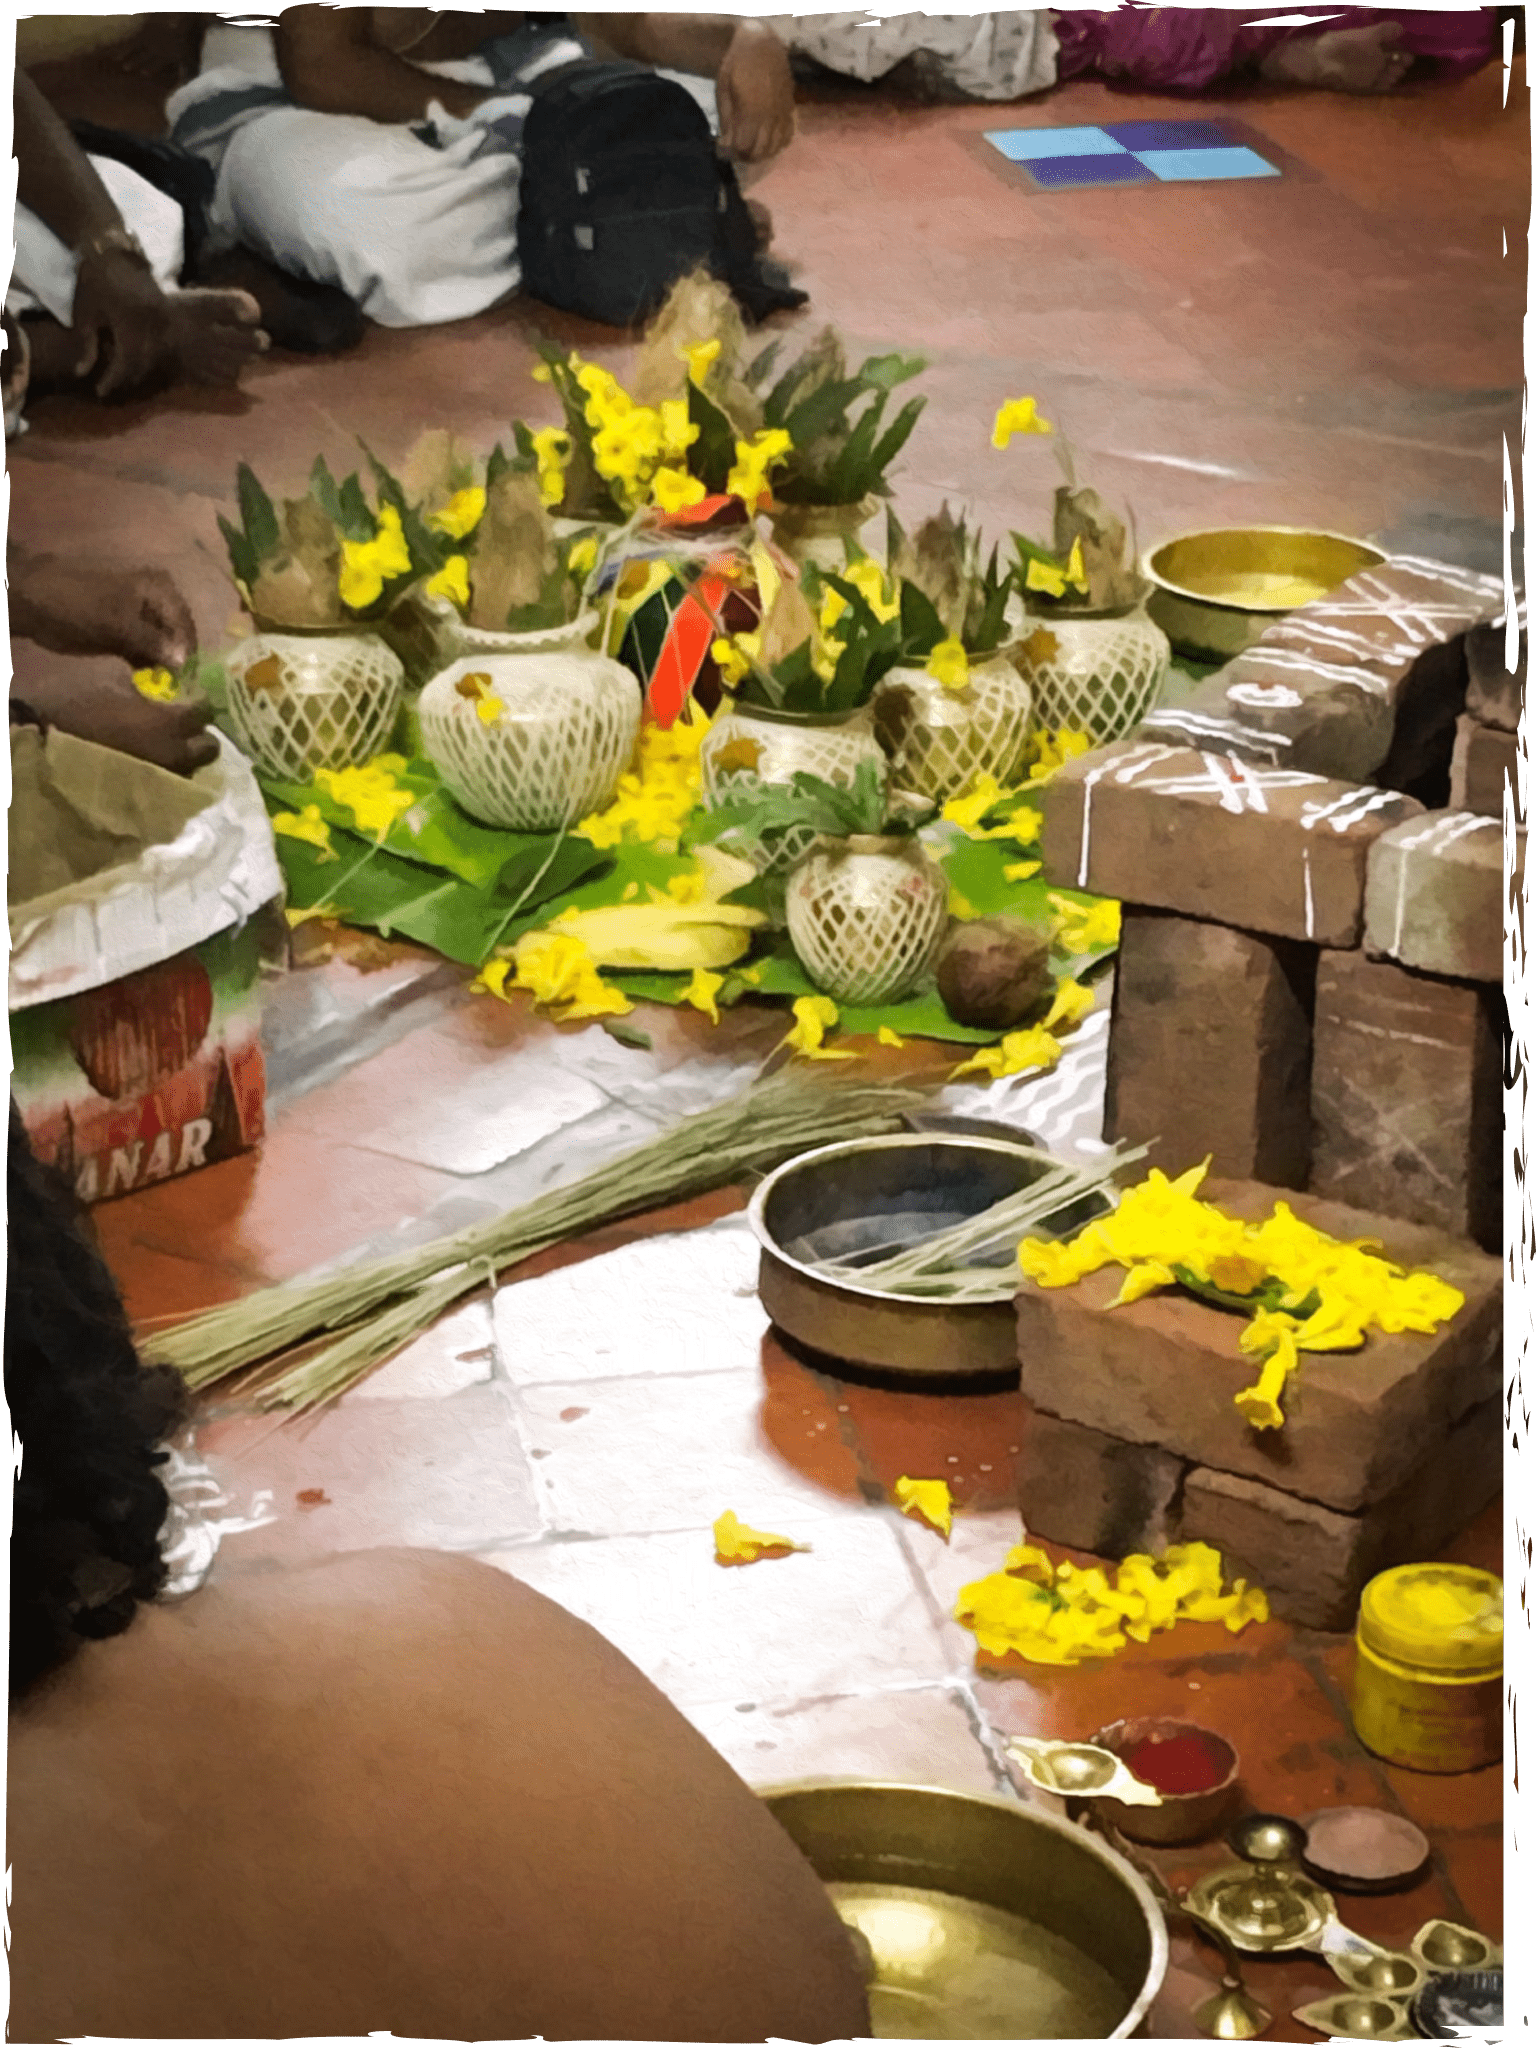 Image of religious items kept ready for ritual.